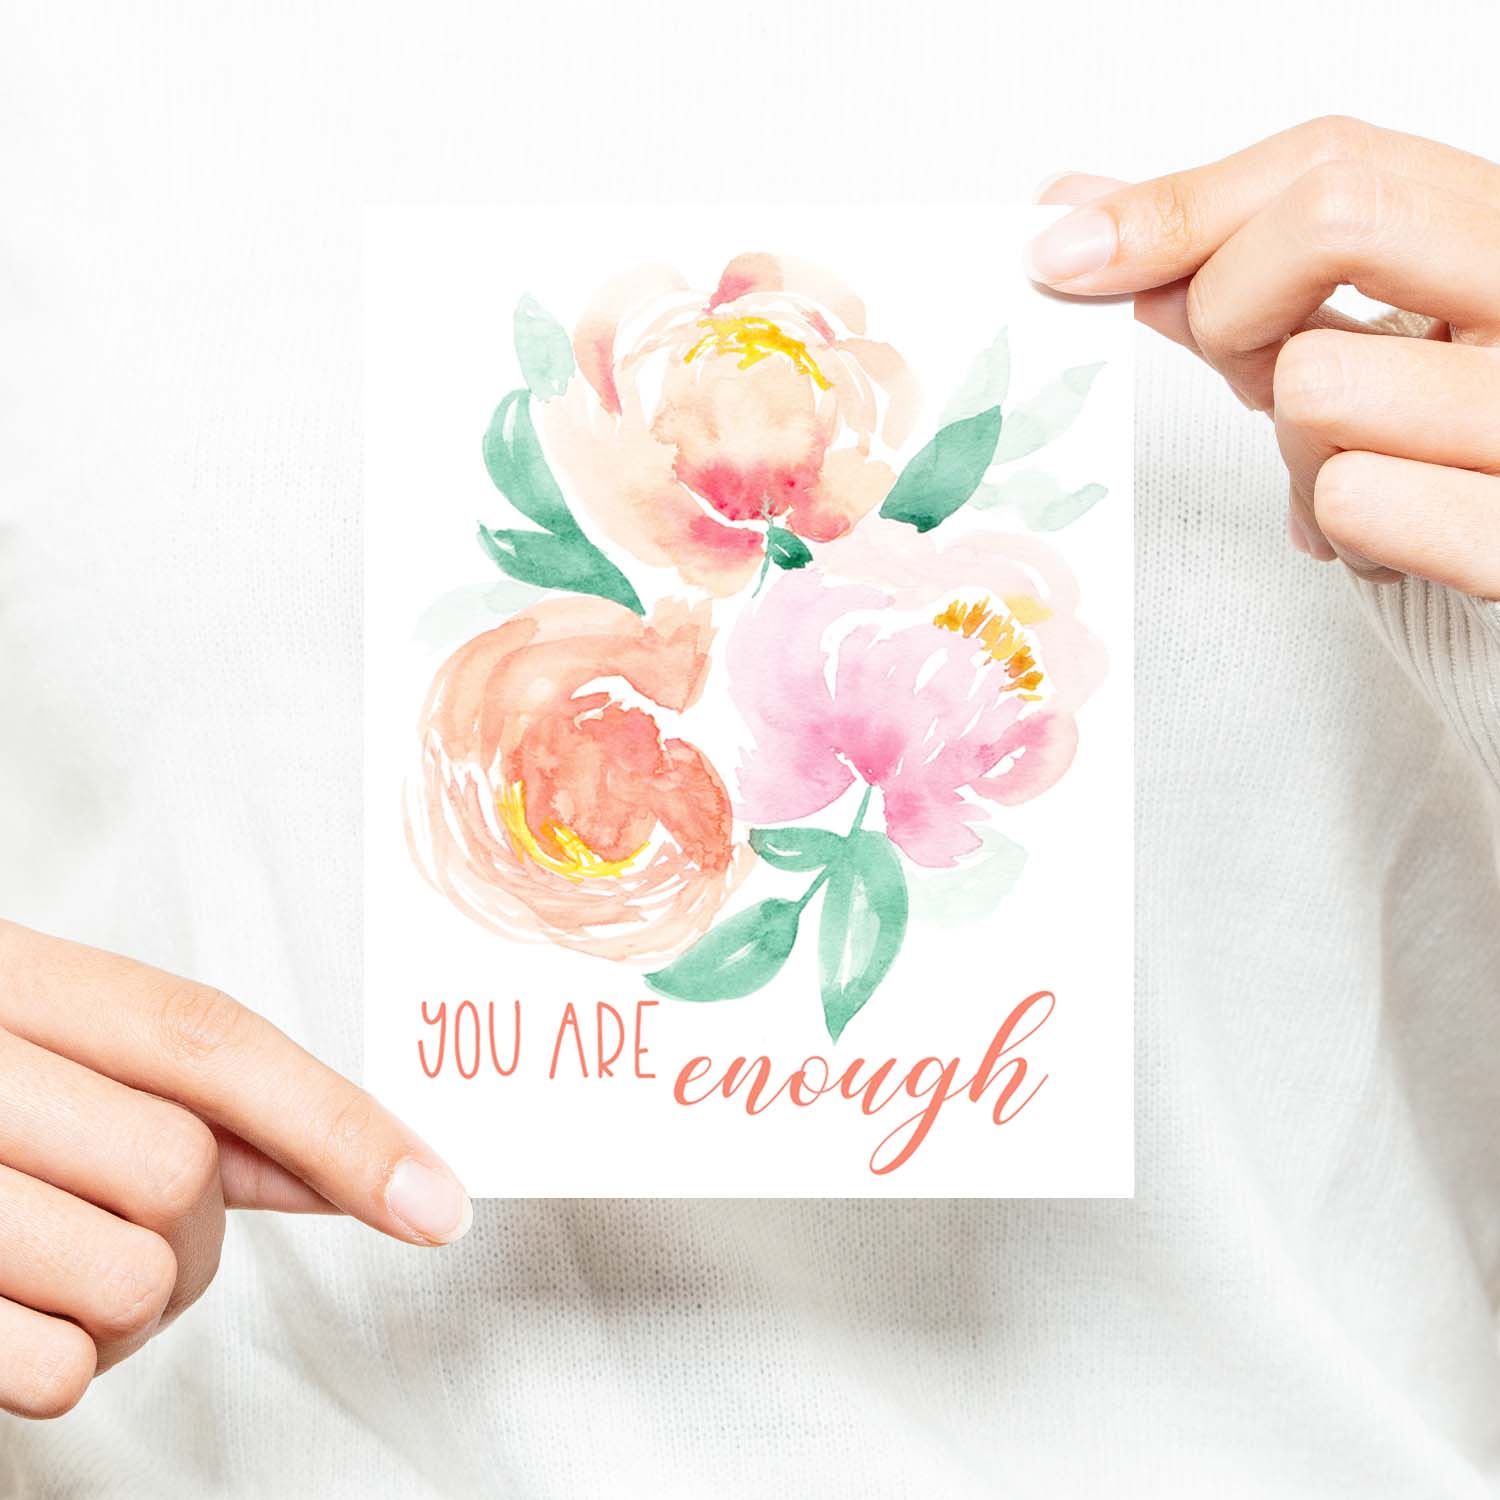 watercolor peonies in soft pastel colors friendship greeting card that says you are enough with a white A2 envelope shown with a woman in a white sweater holding card